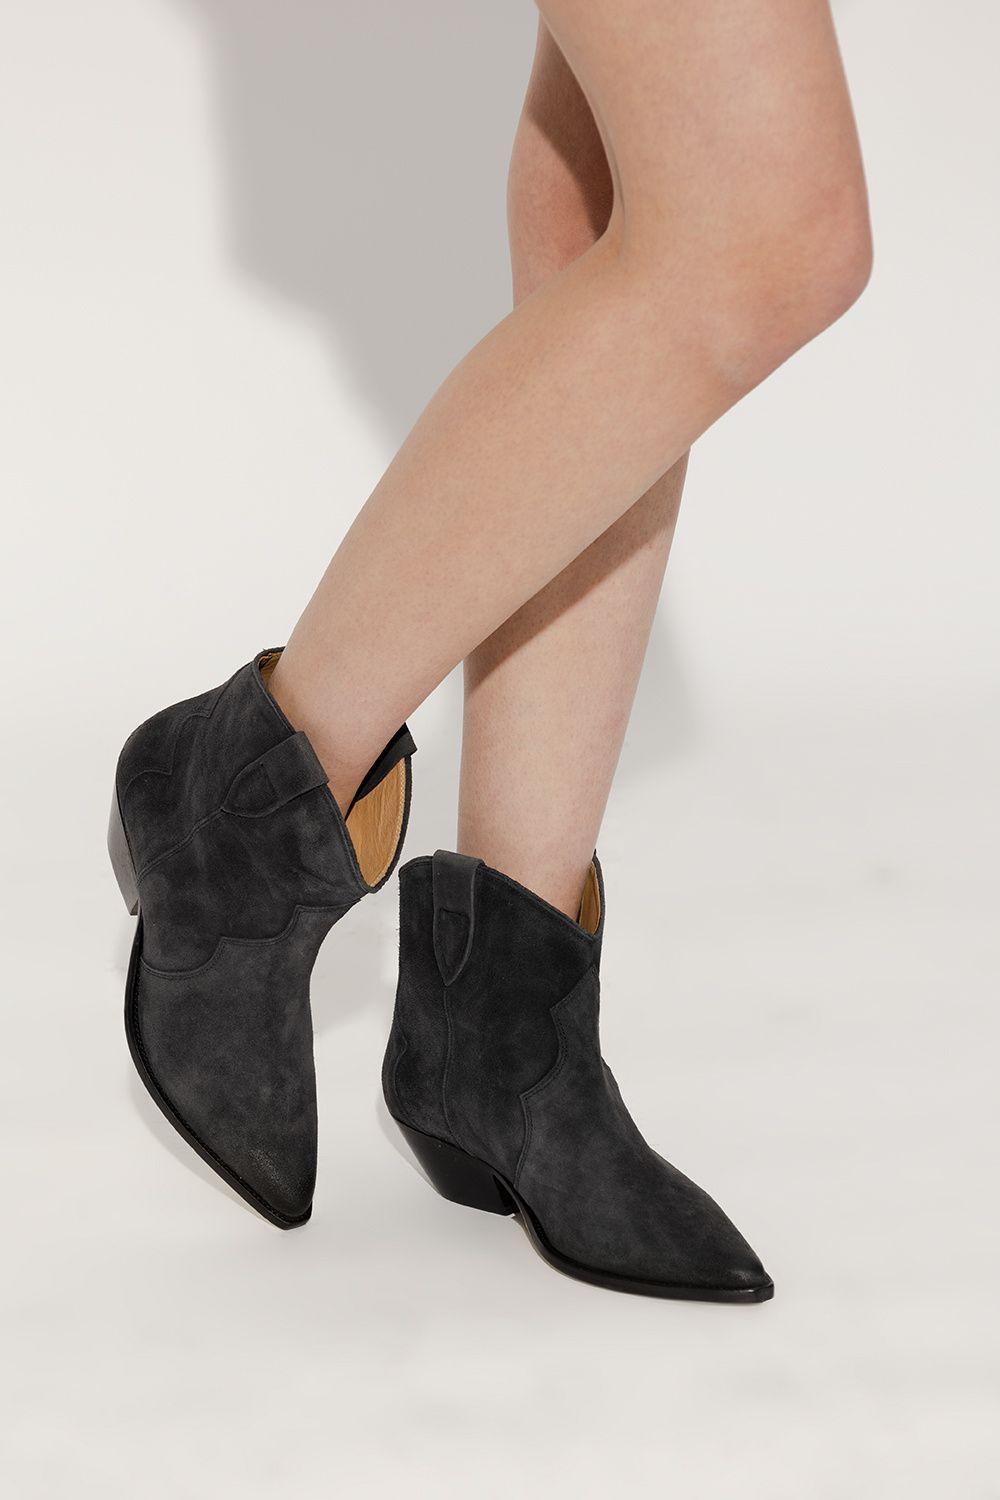 Isabel Marant 'dewina' Heeled Ankle Boots in Black | Lyst